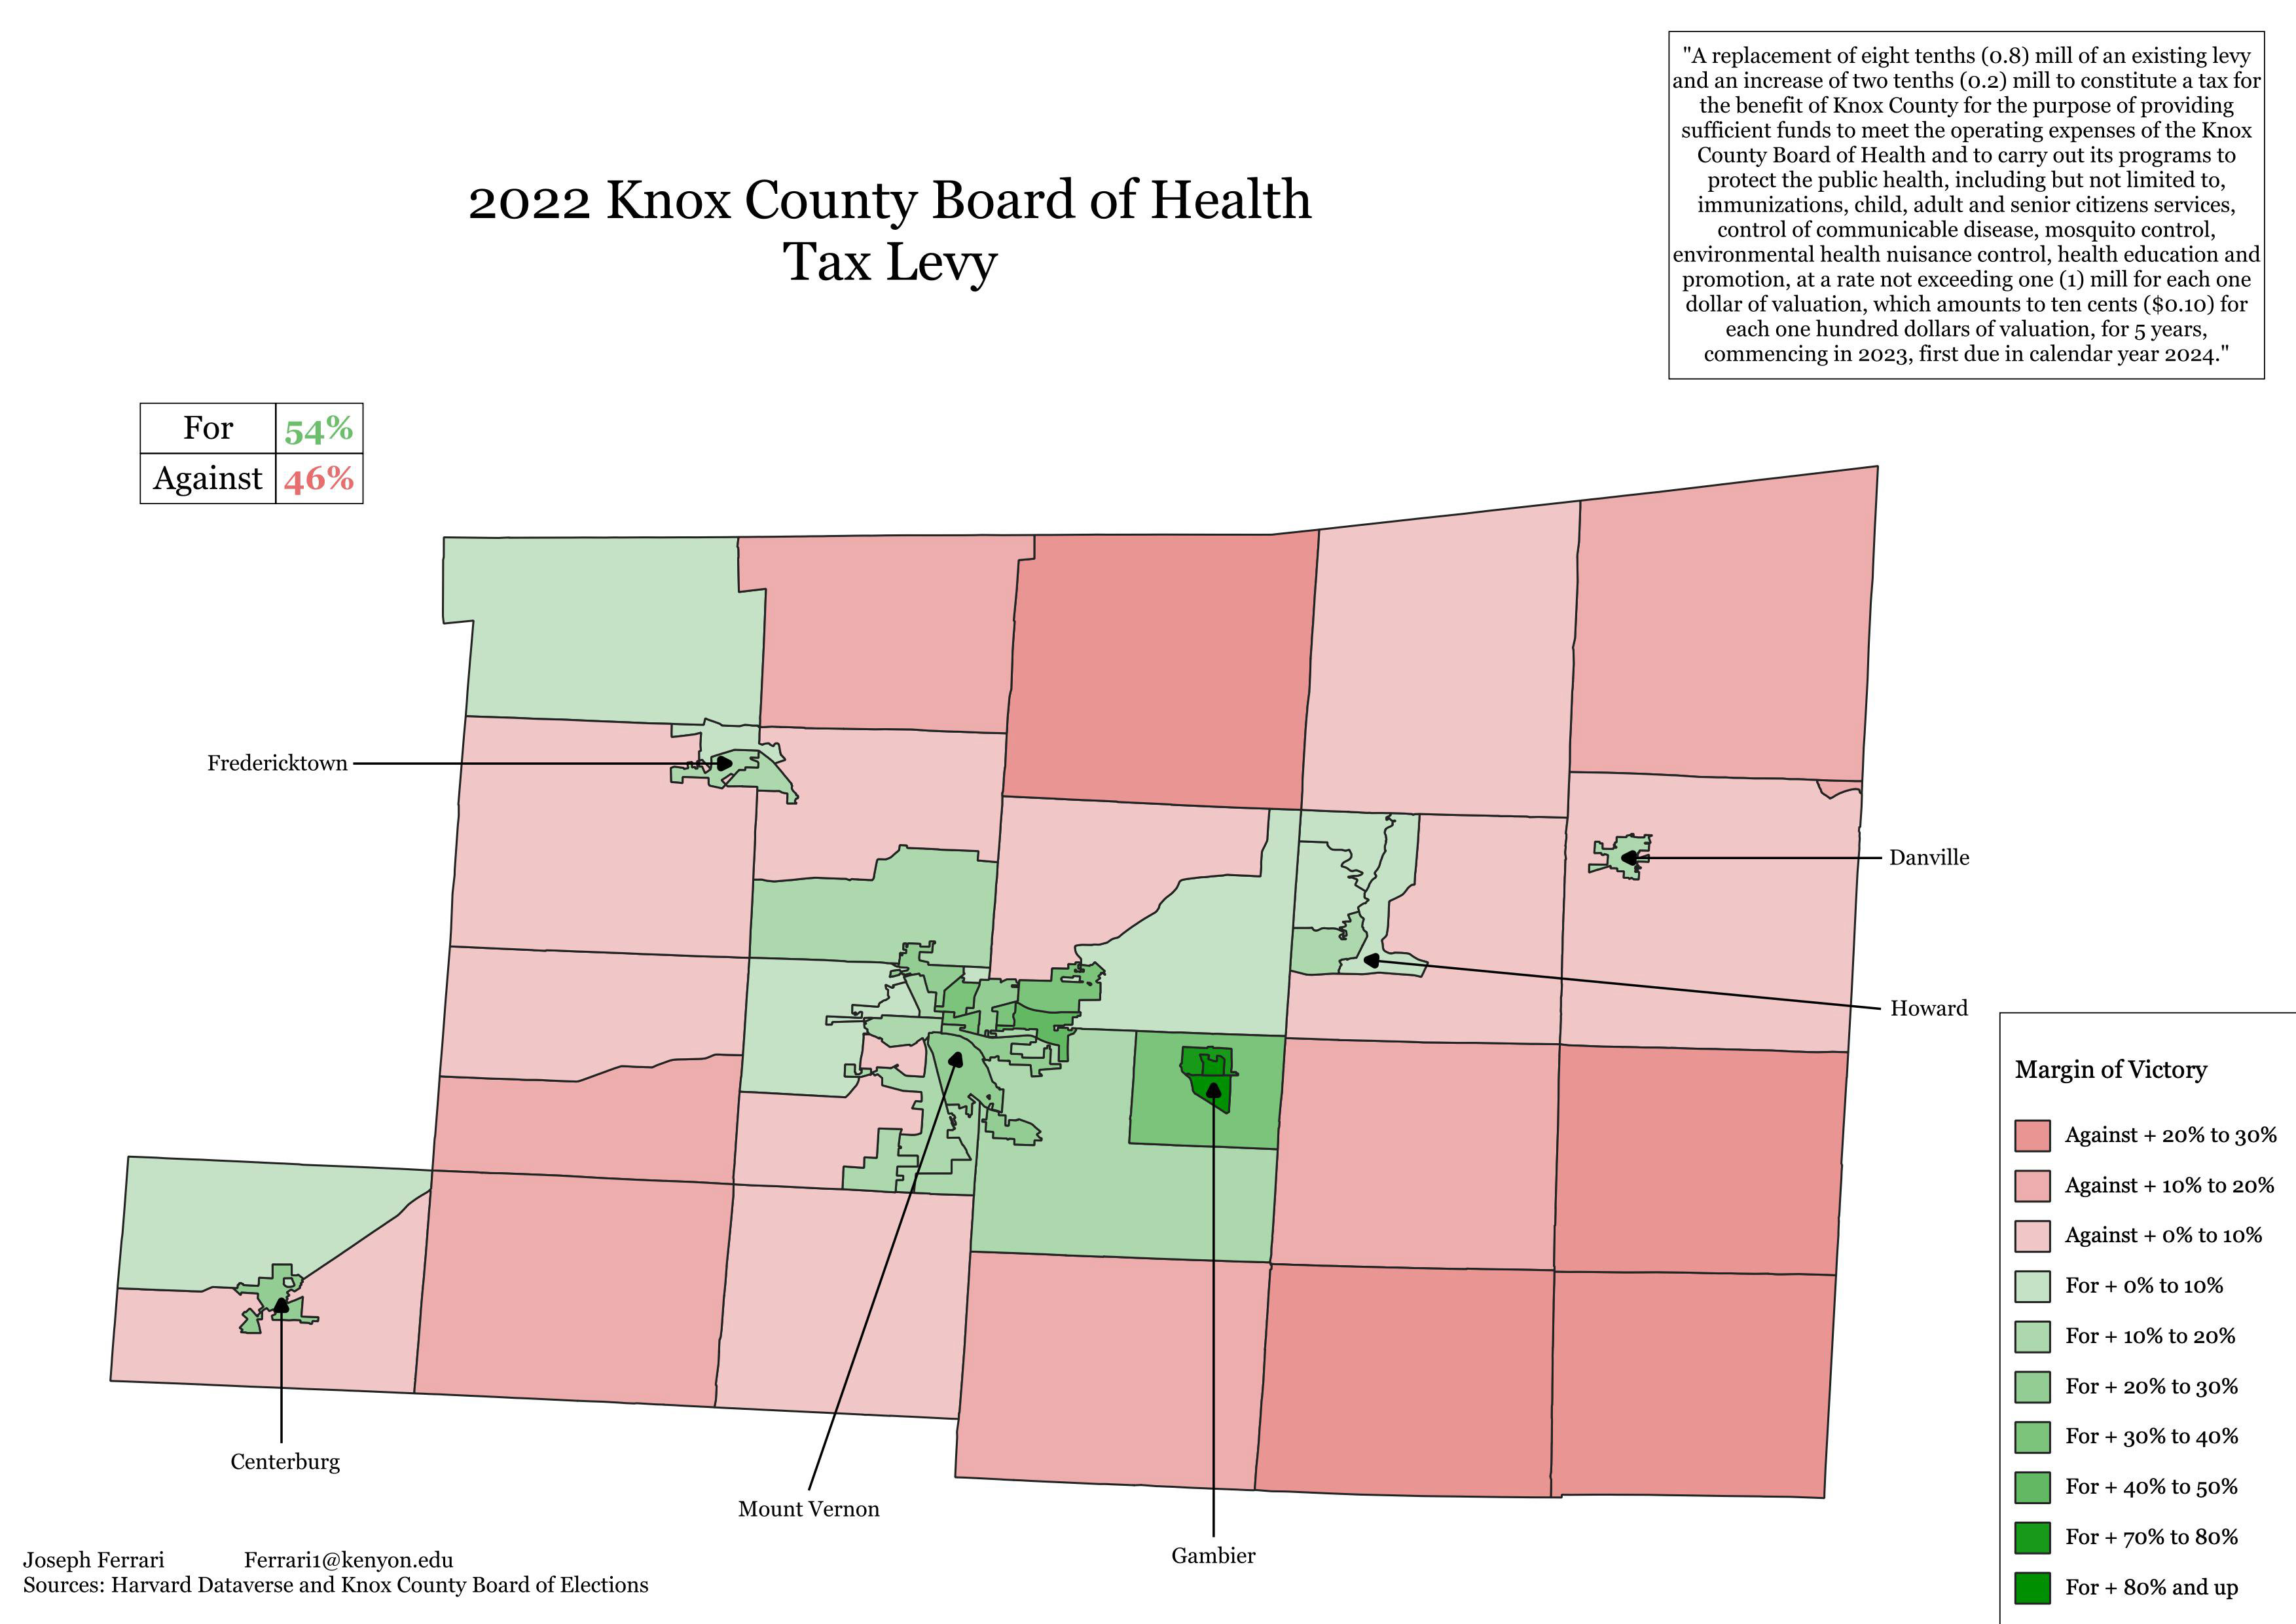 Map showing 2022 Knox County Board of Health tax levy voter results